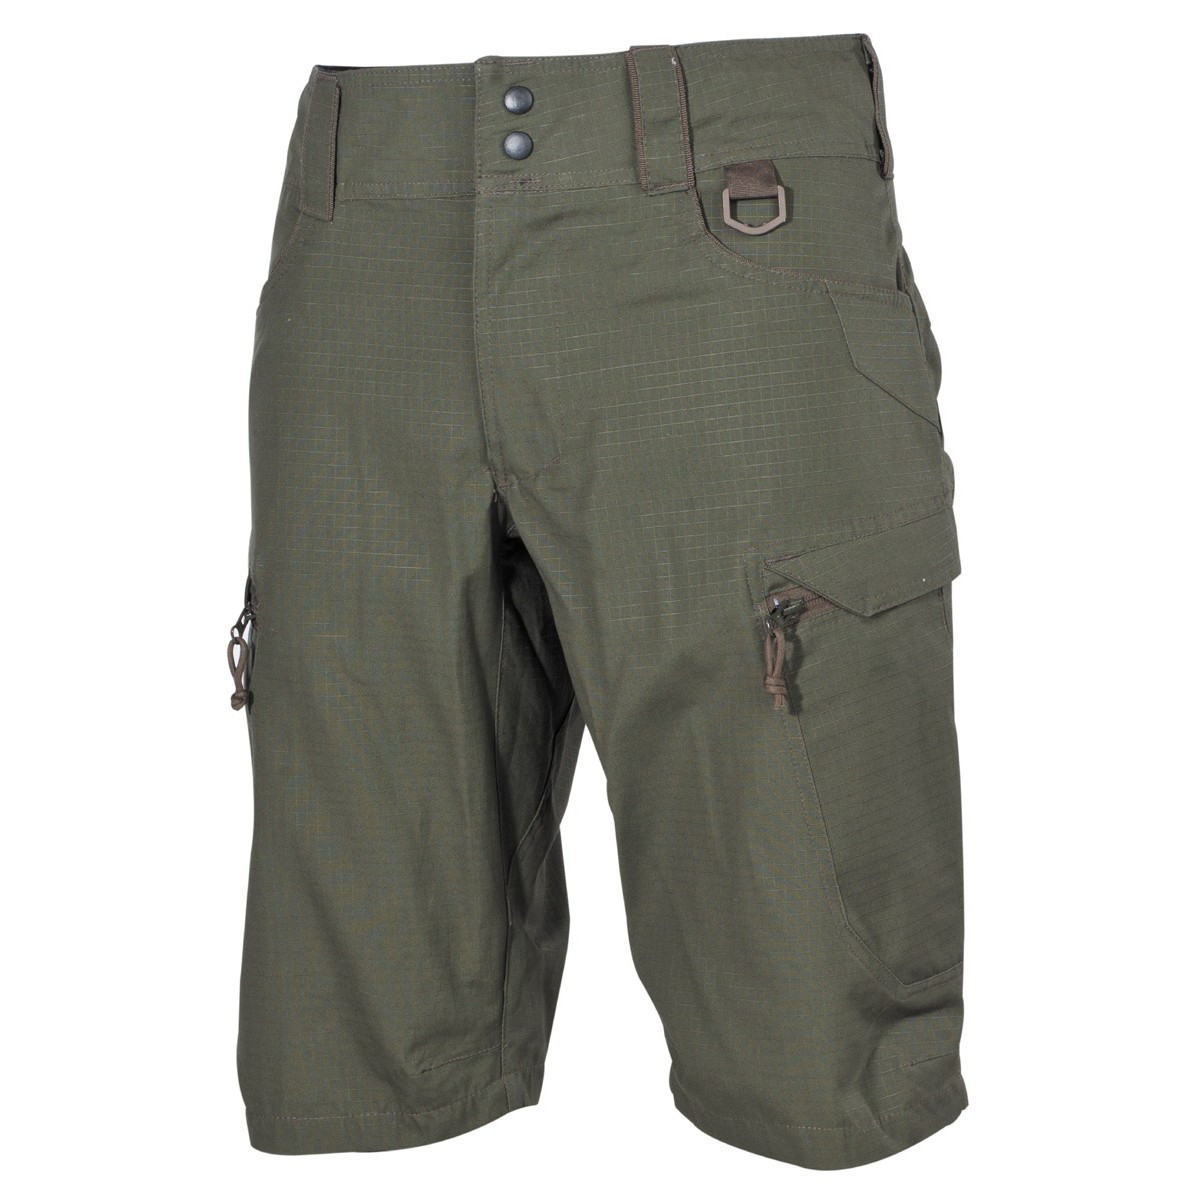 Professional Tactical Military Battle Army Shorts „Defense“ Rip Stop - OD Green